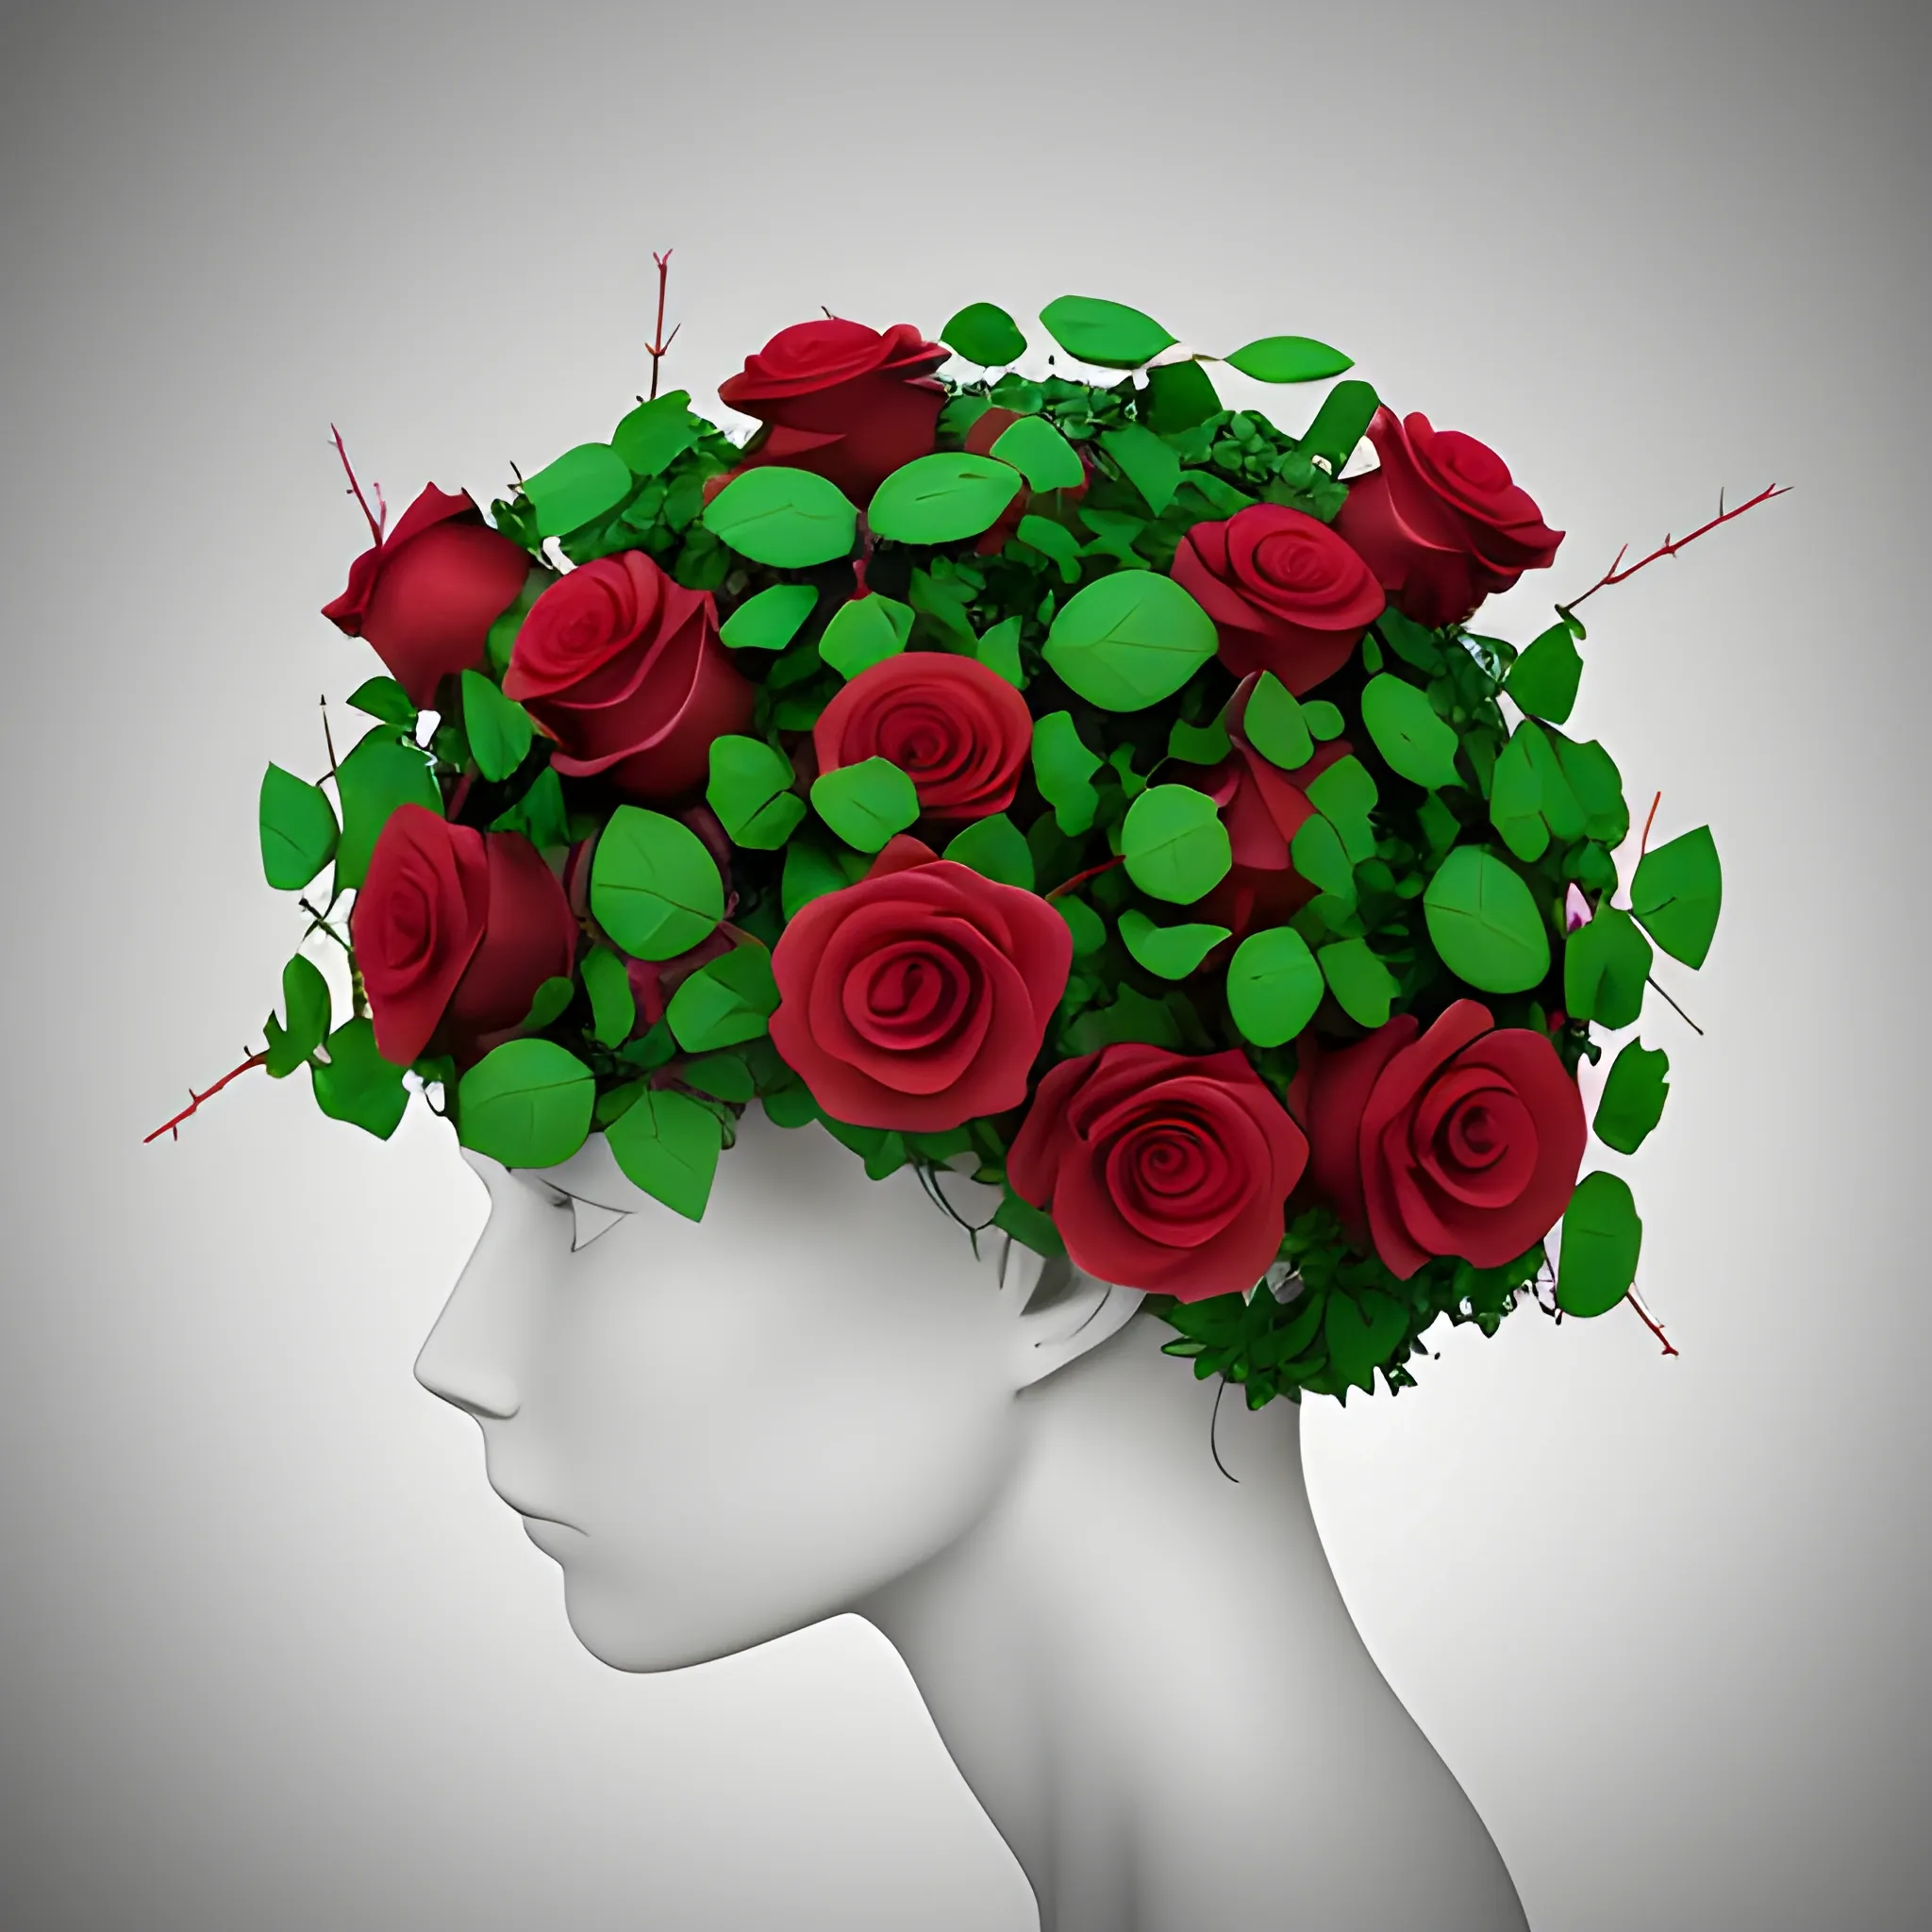 brain only with red roses and green vines with thorns on them growing out of the brain like a garden, 3D